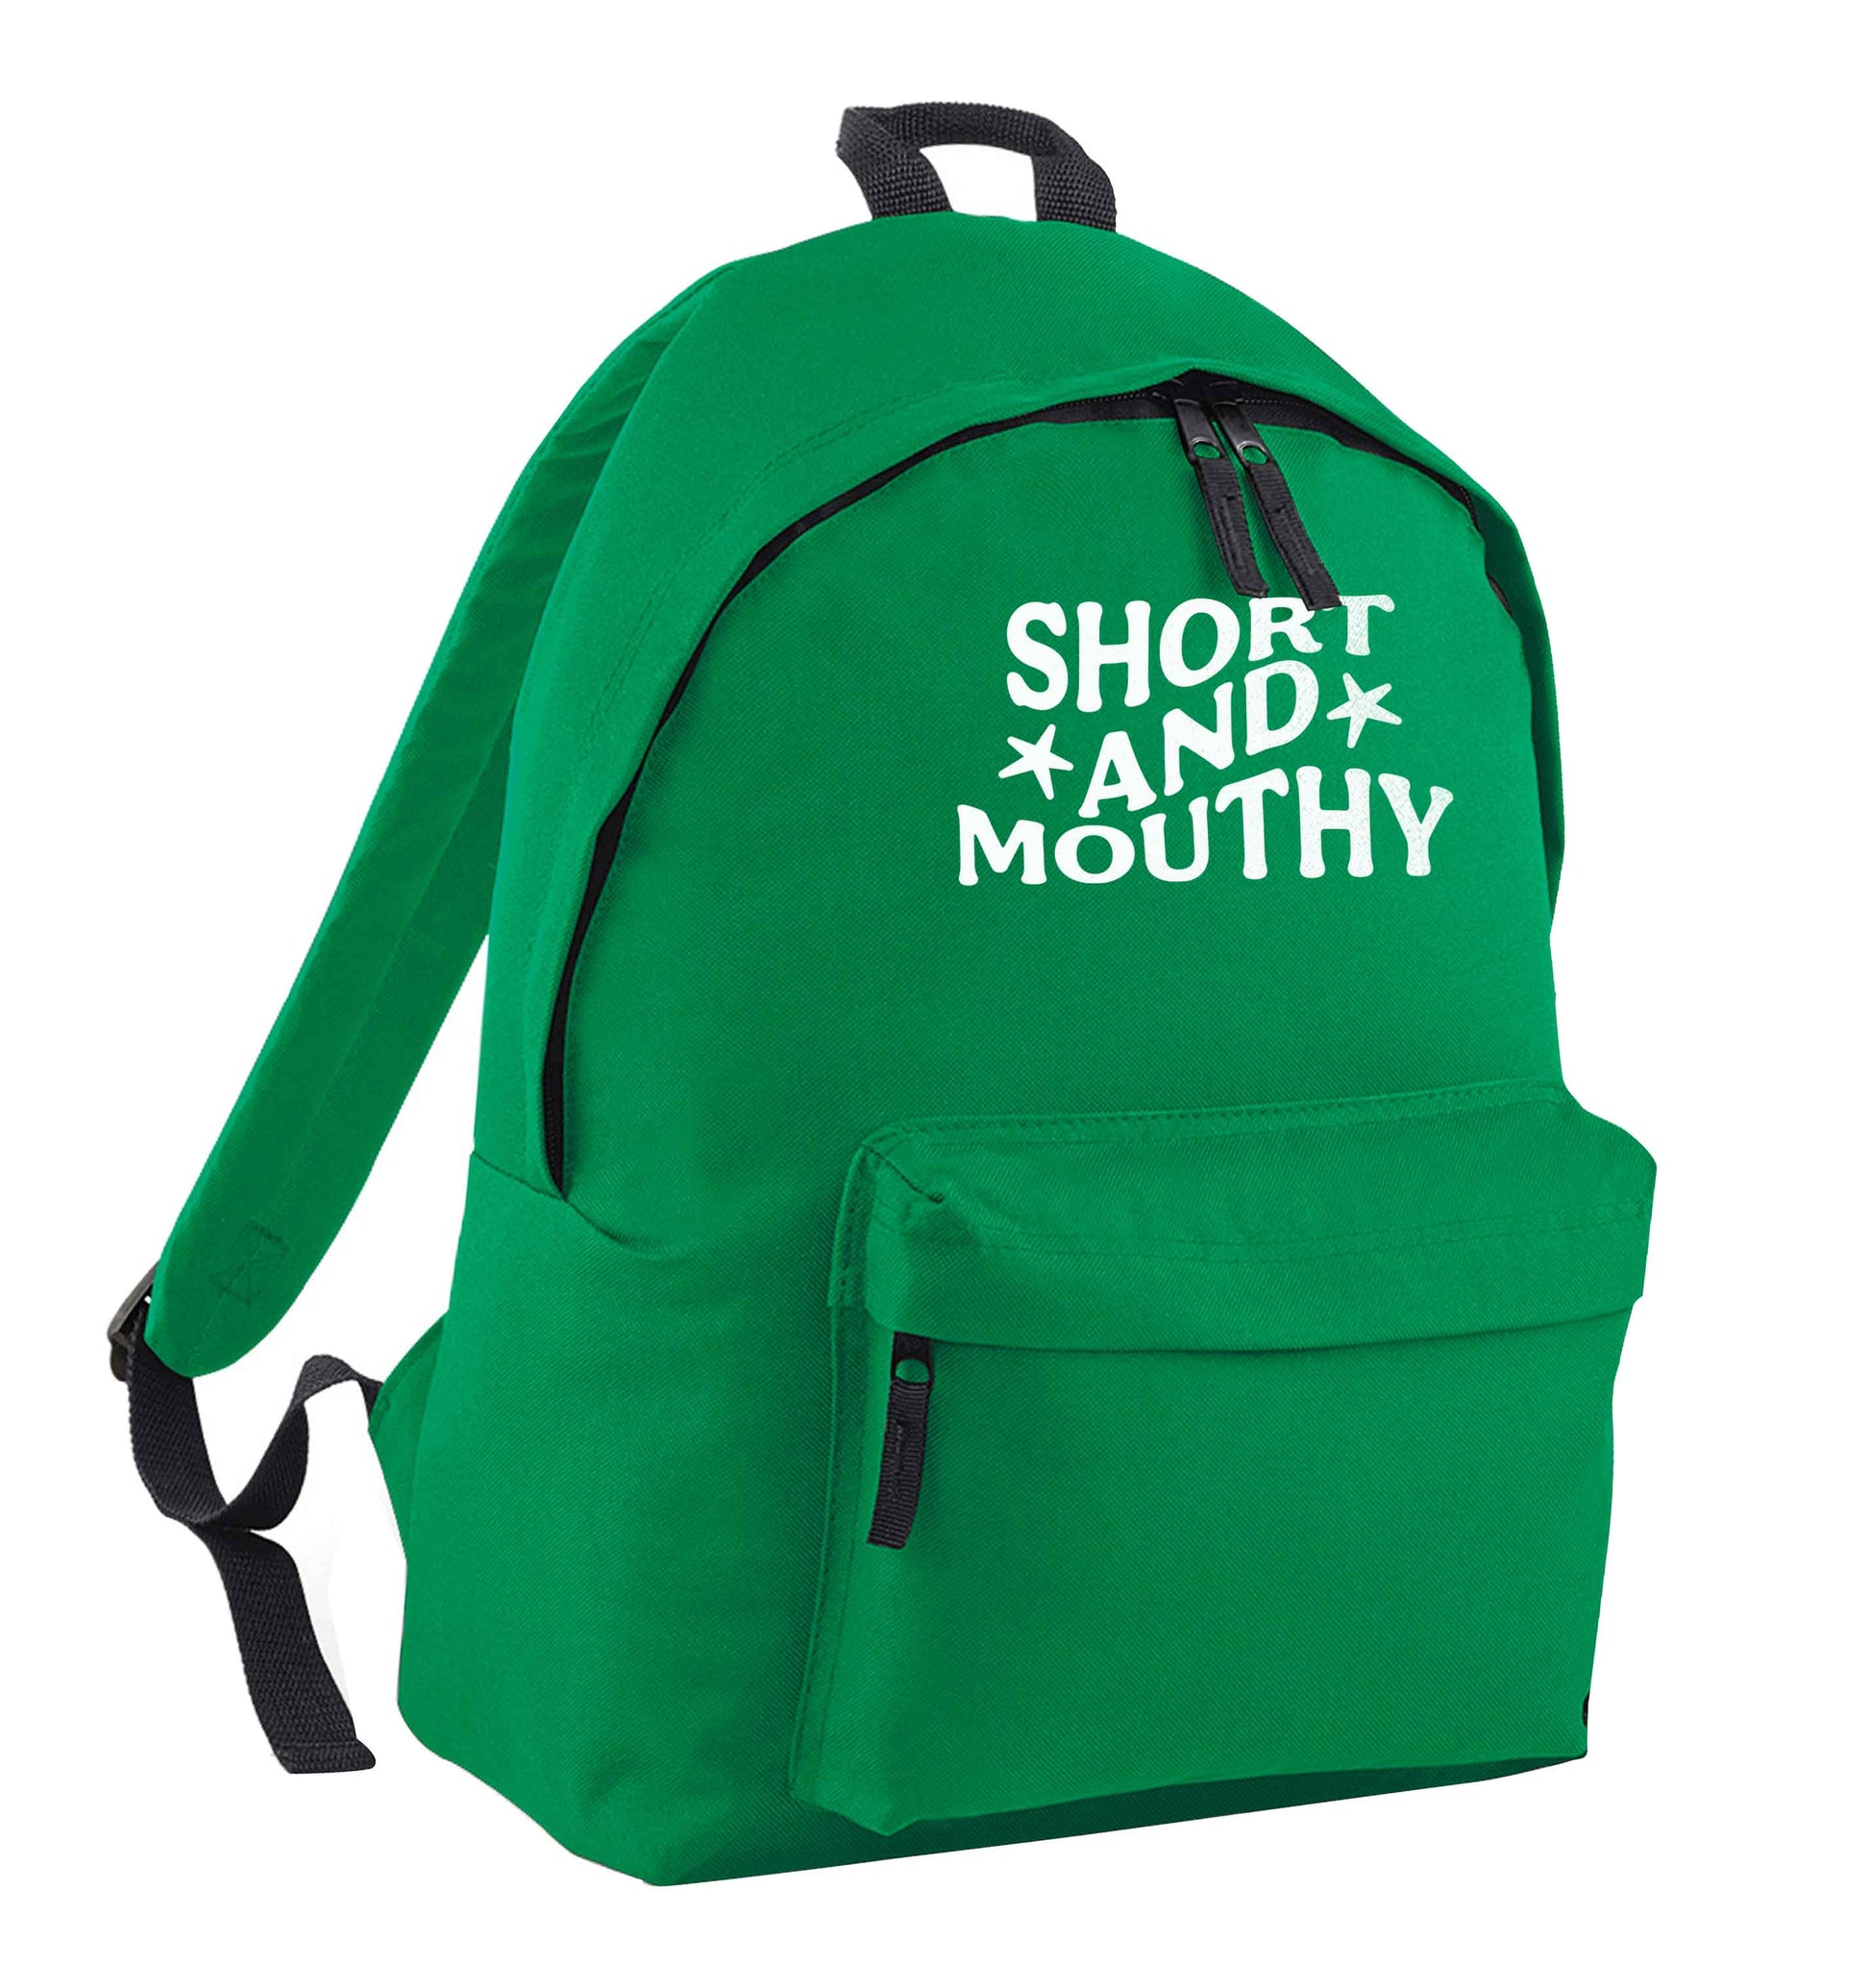 Short and mouthy green adults backpack